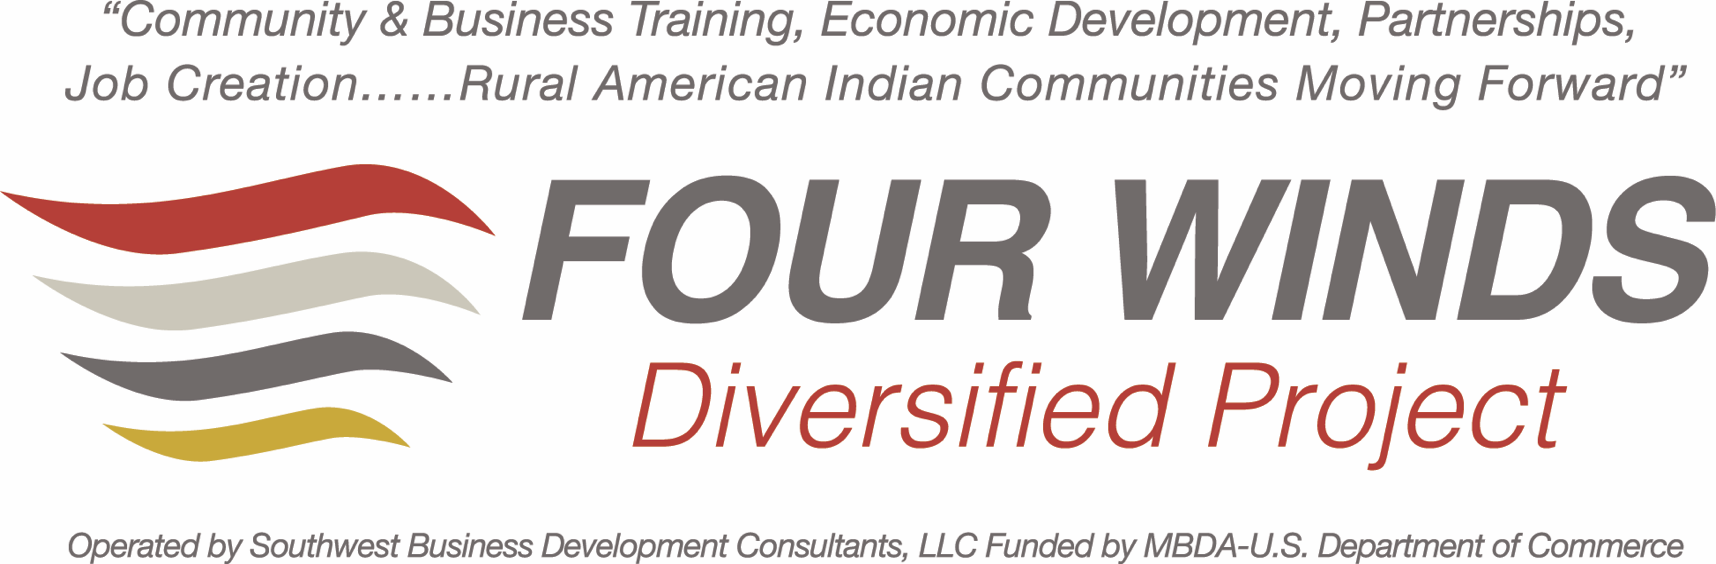 Four Winds Diversified Project logo